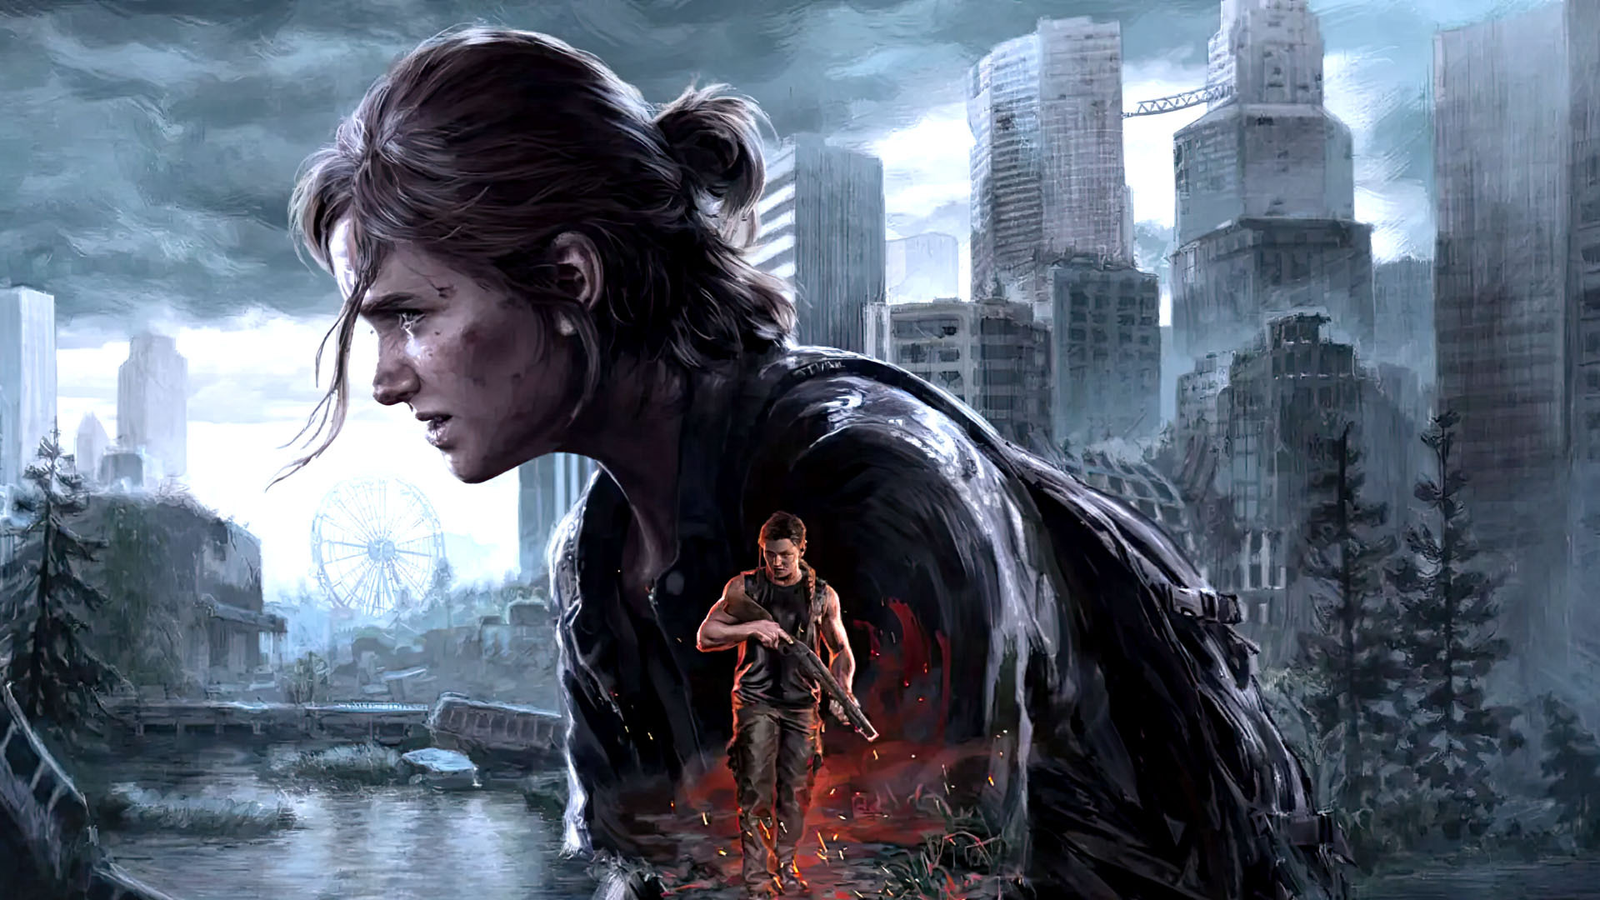 It looks like we might get The Last of Us Part 2 on PS5 after all